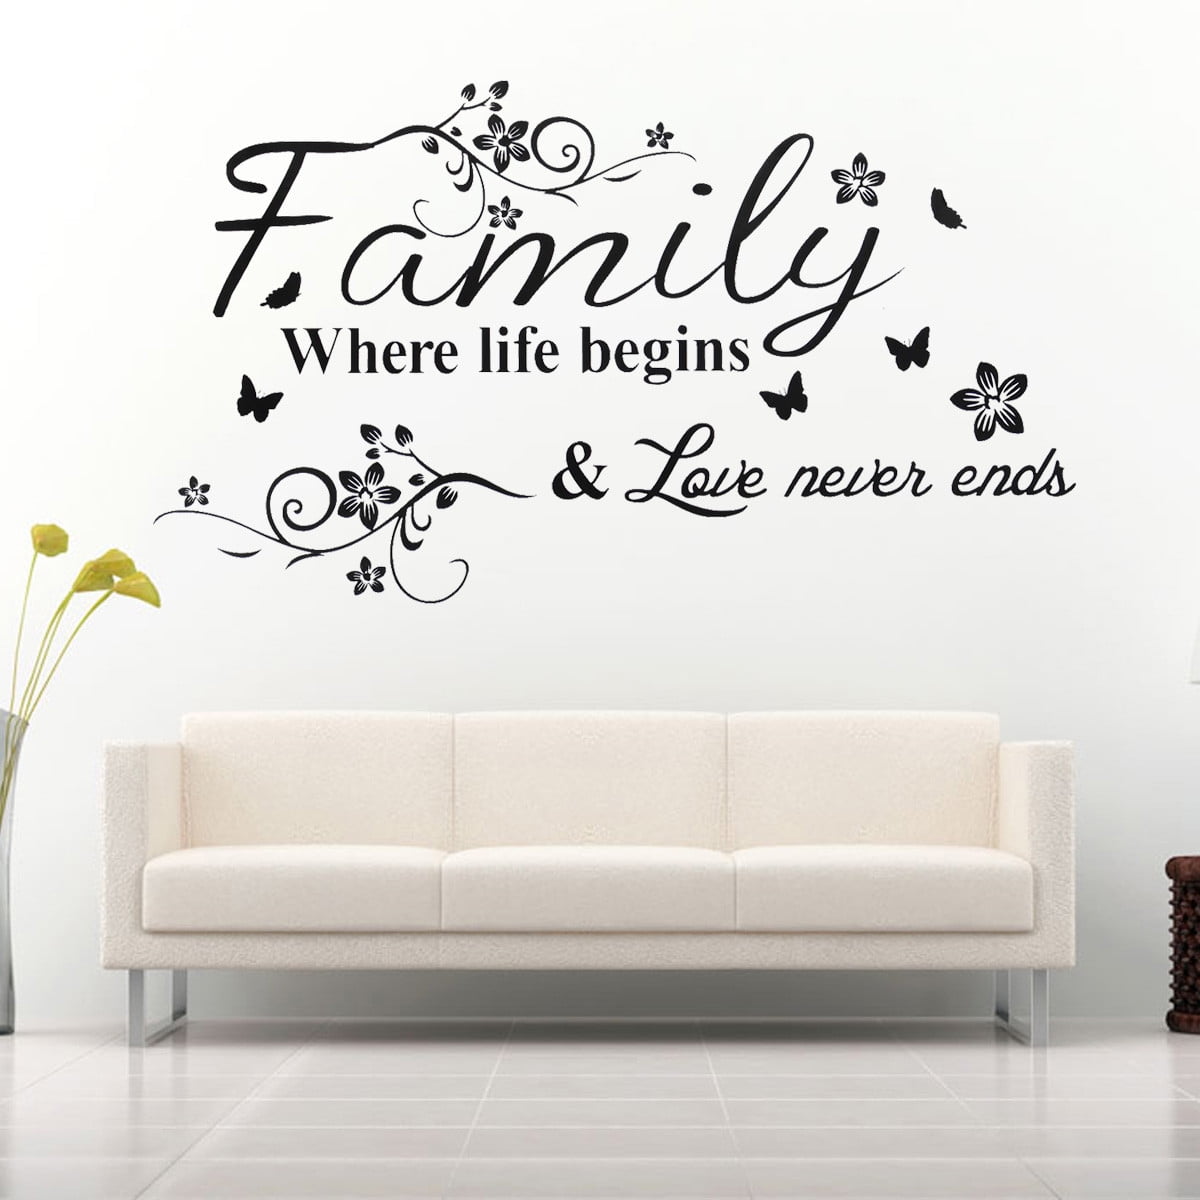 Live Laugh Love Words Home Quote Wall Stickers Art Room Removable Decals DIY 